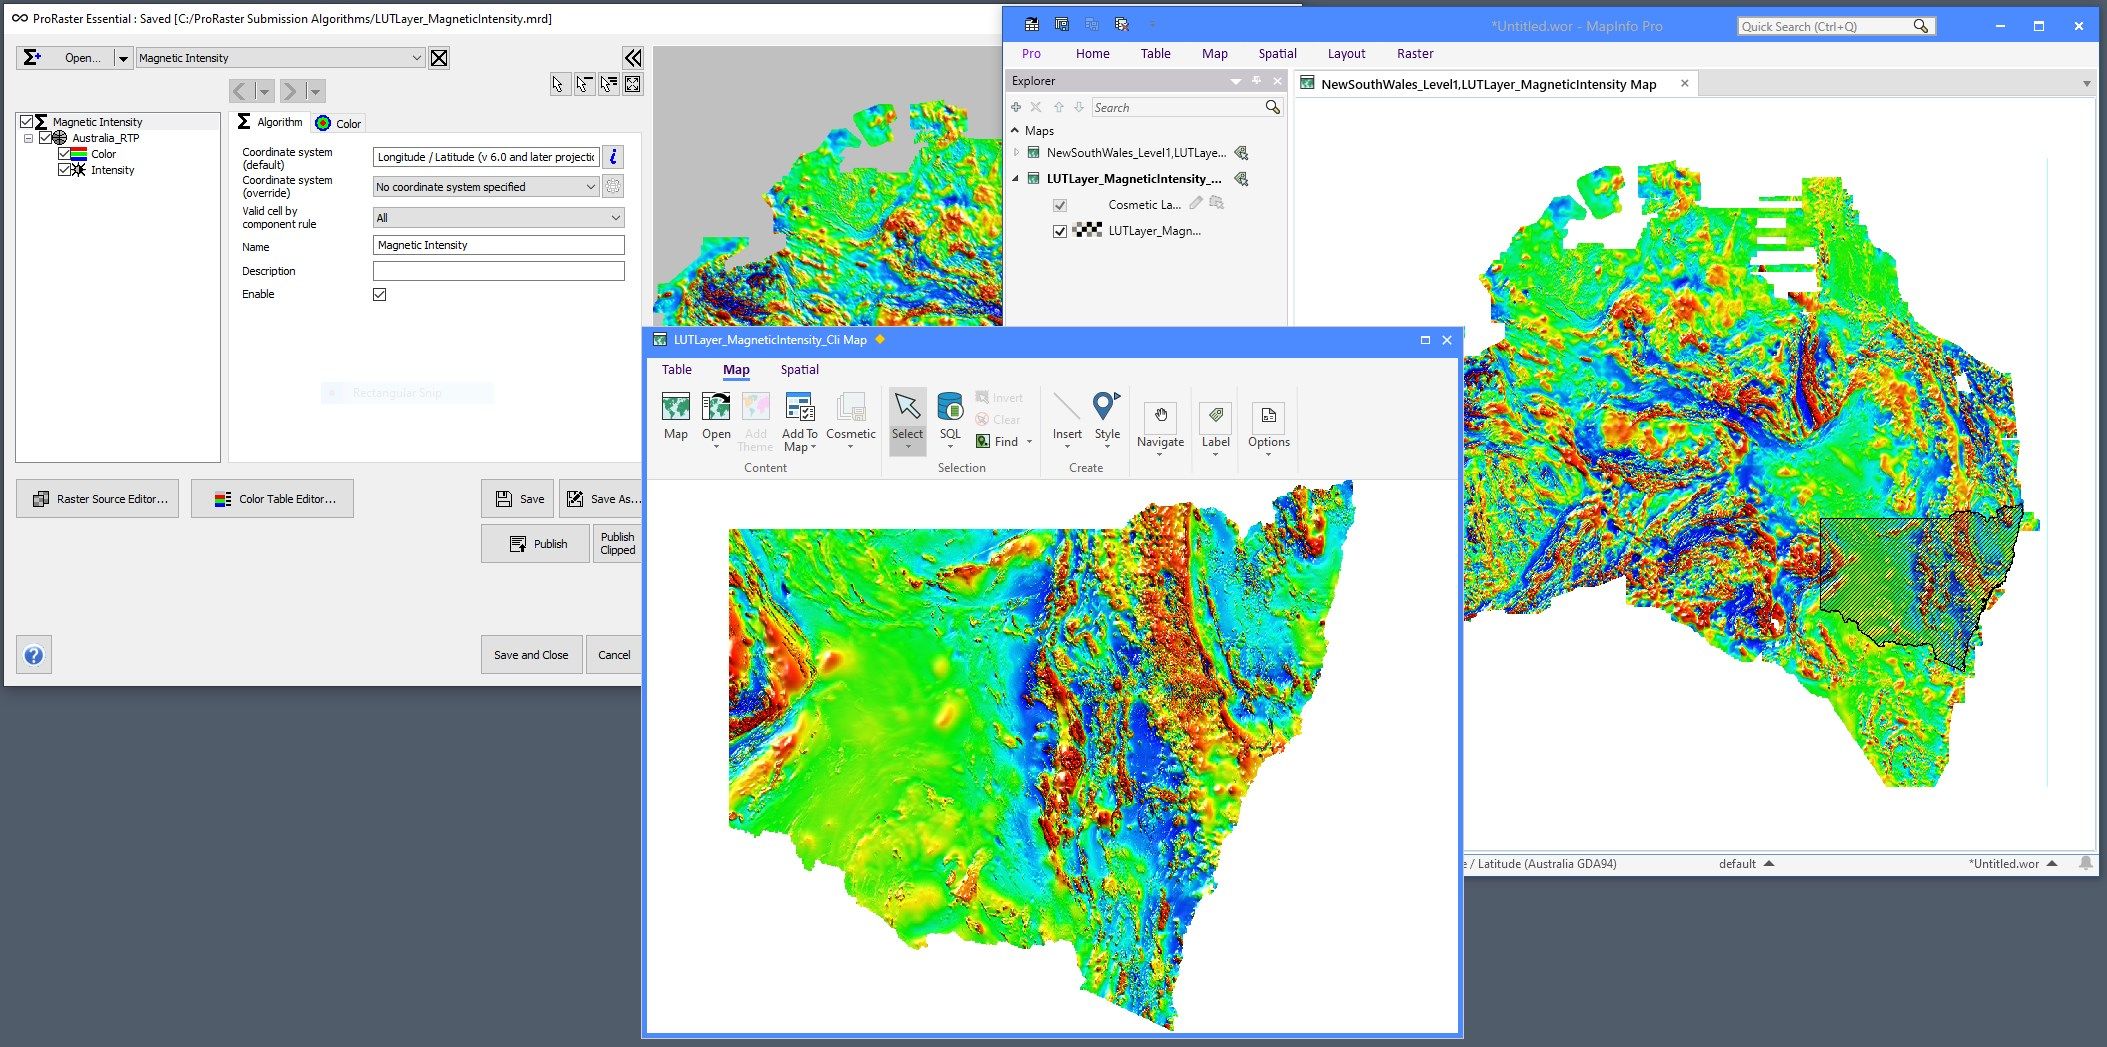 Publish MRD algorithms to MapInfo Pro 2021 and display in maps, with polygon clipping